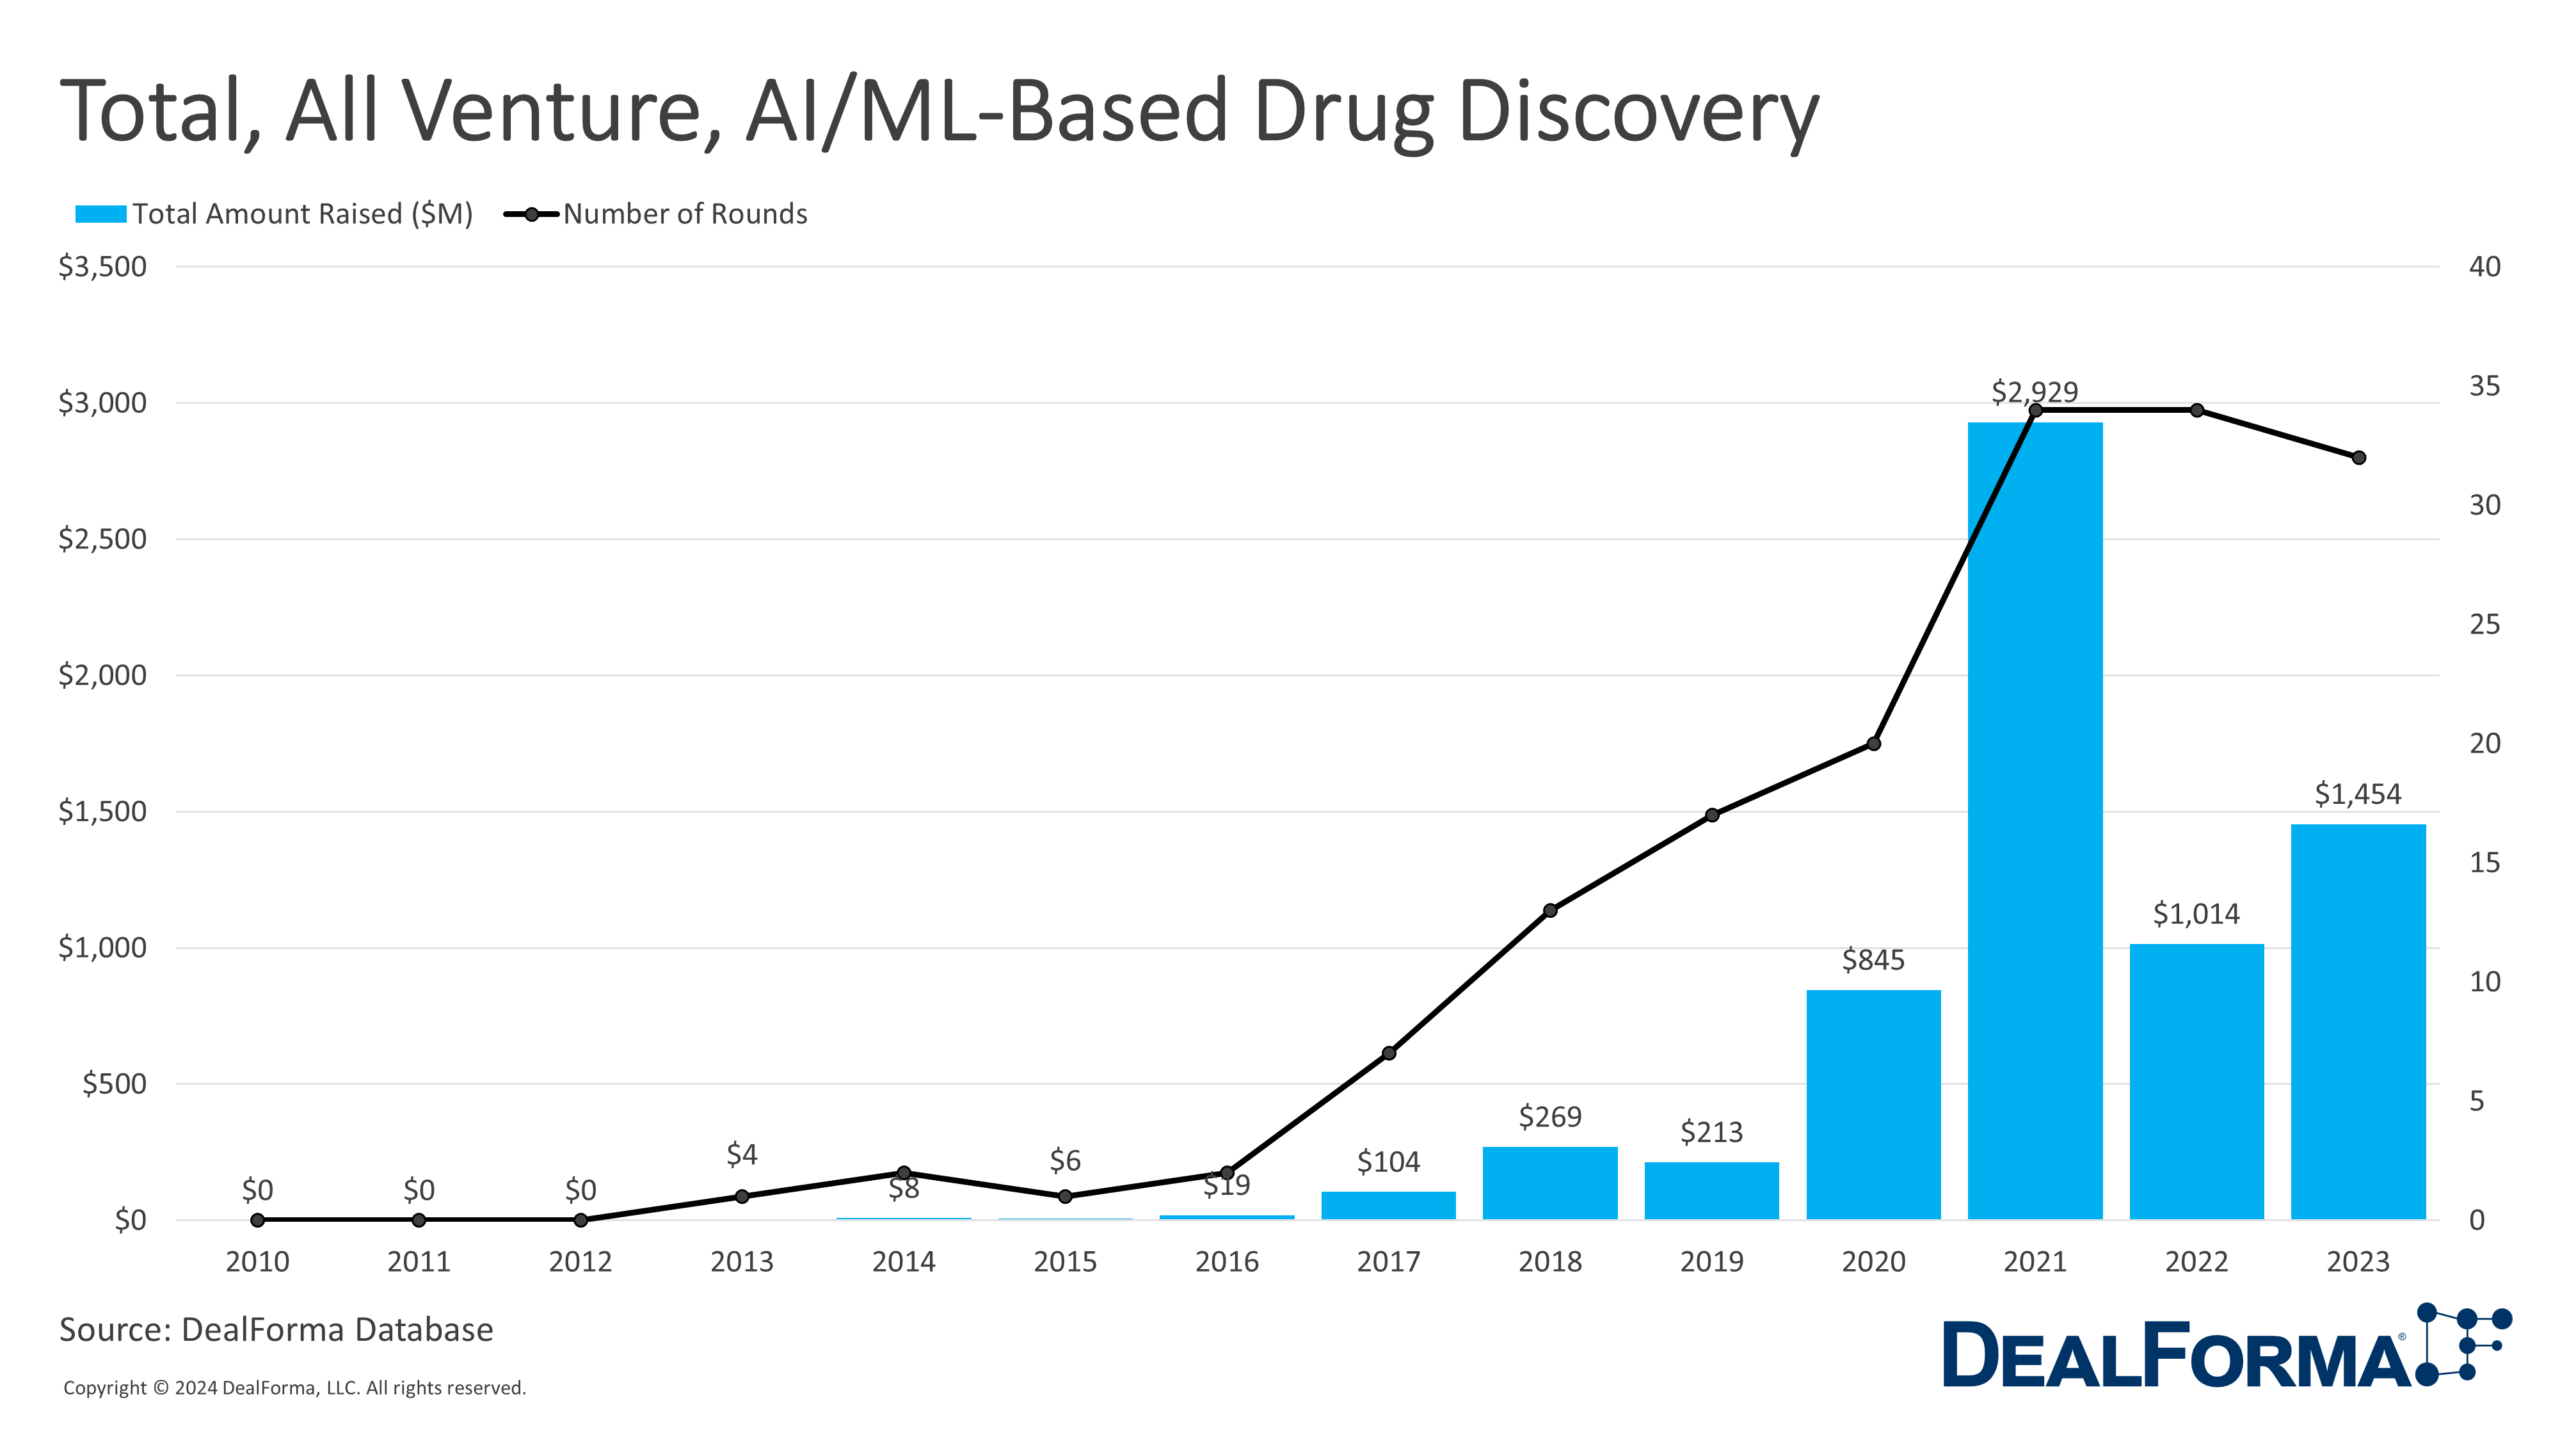 Total, All Venture, AI/ML-Based Drug Discovery